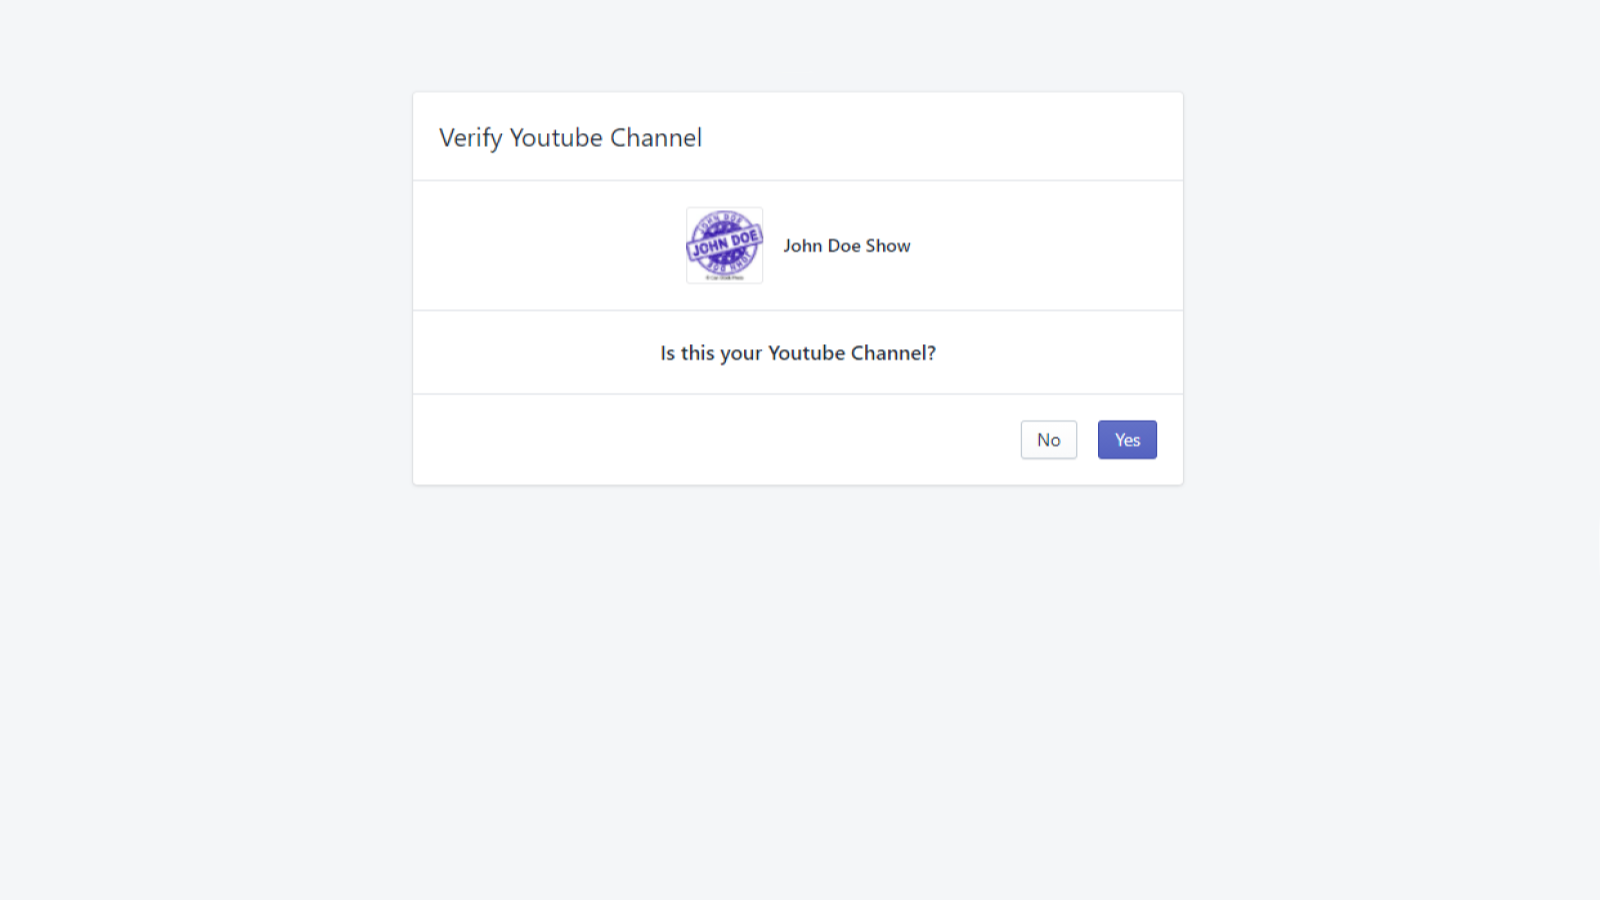 Verifying your Youtube Channel